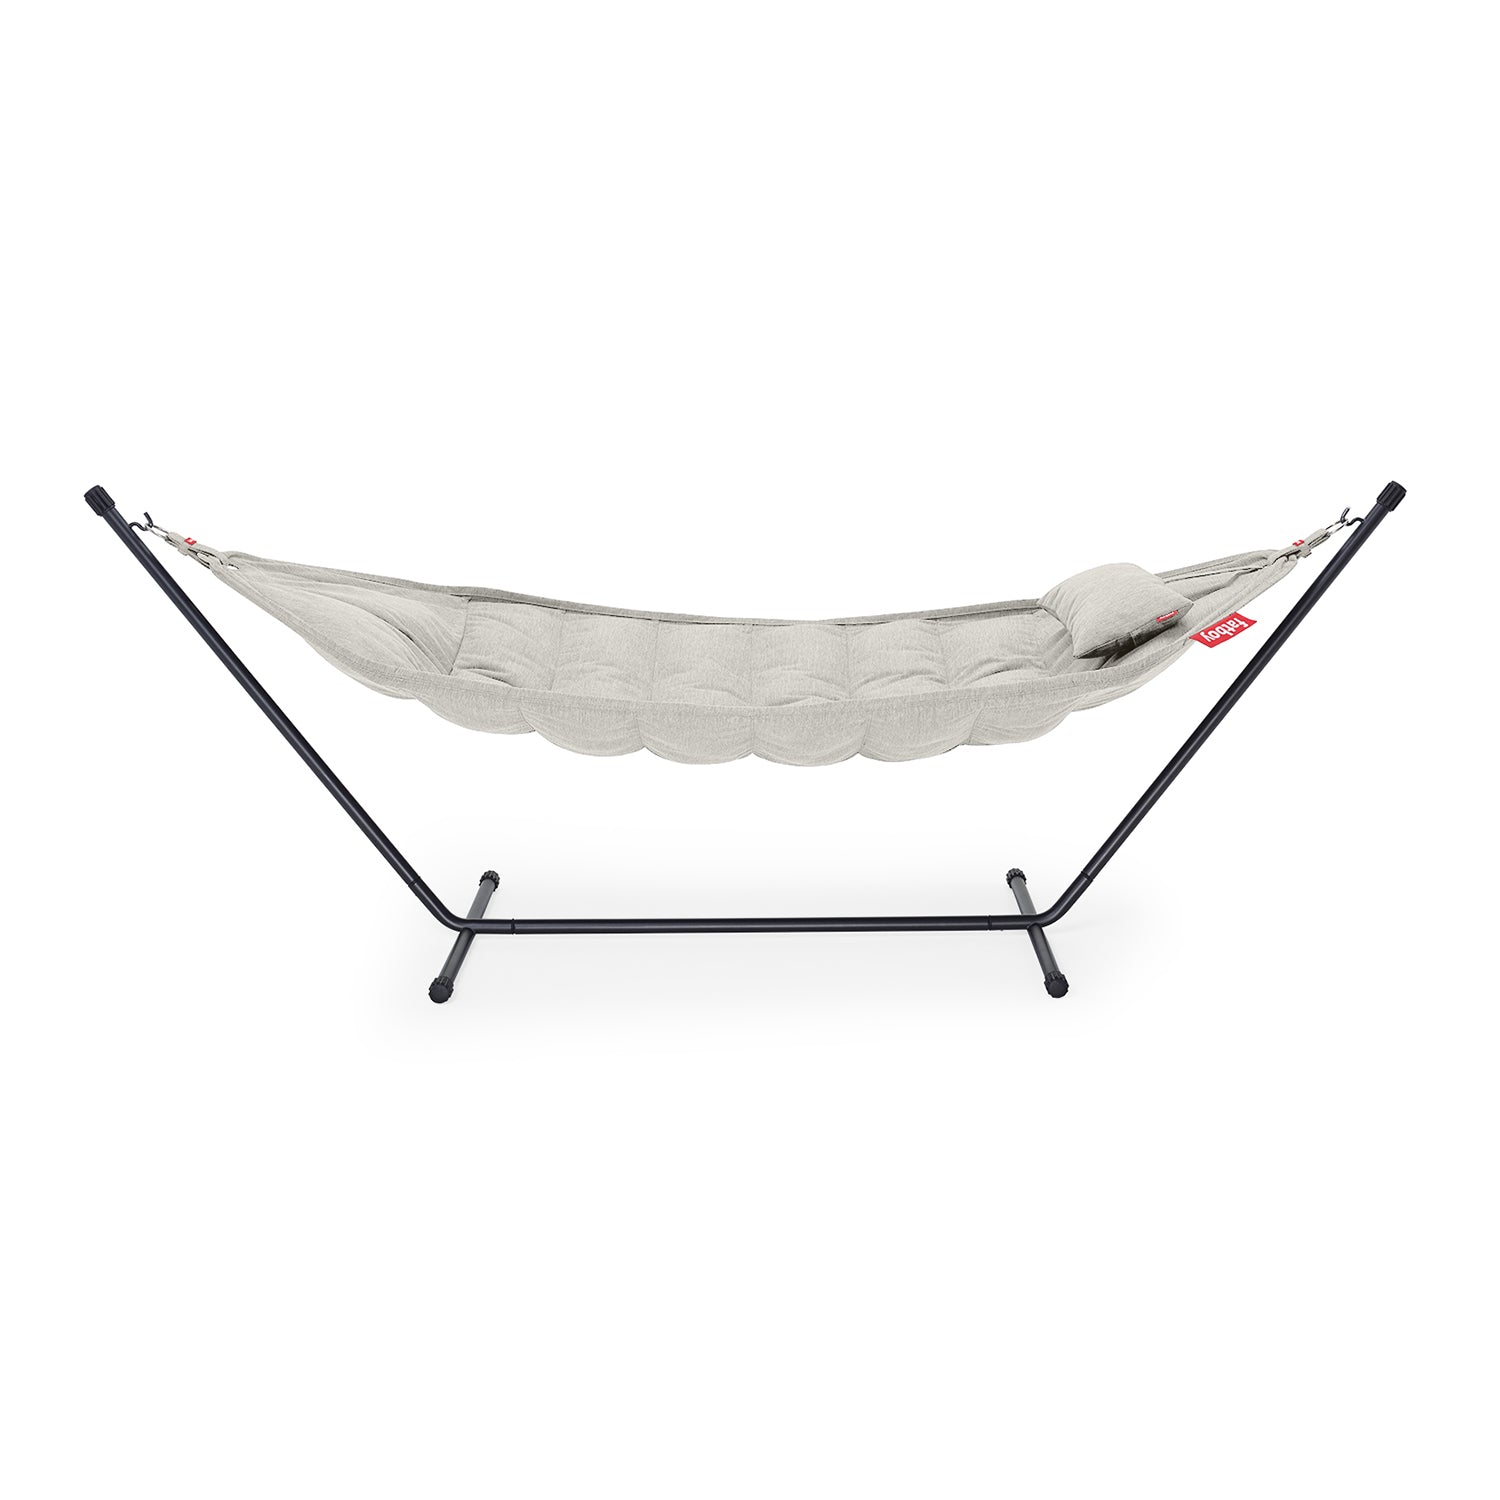 Headdemock Superb Deluxe Hammock with Pillow - The Design Choice